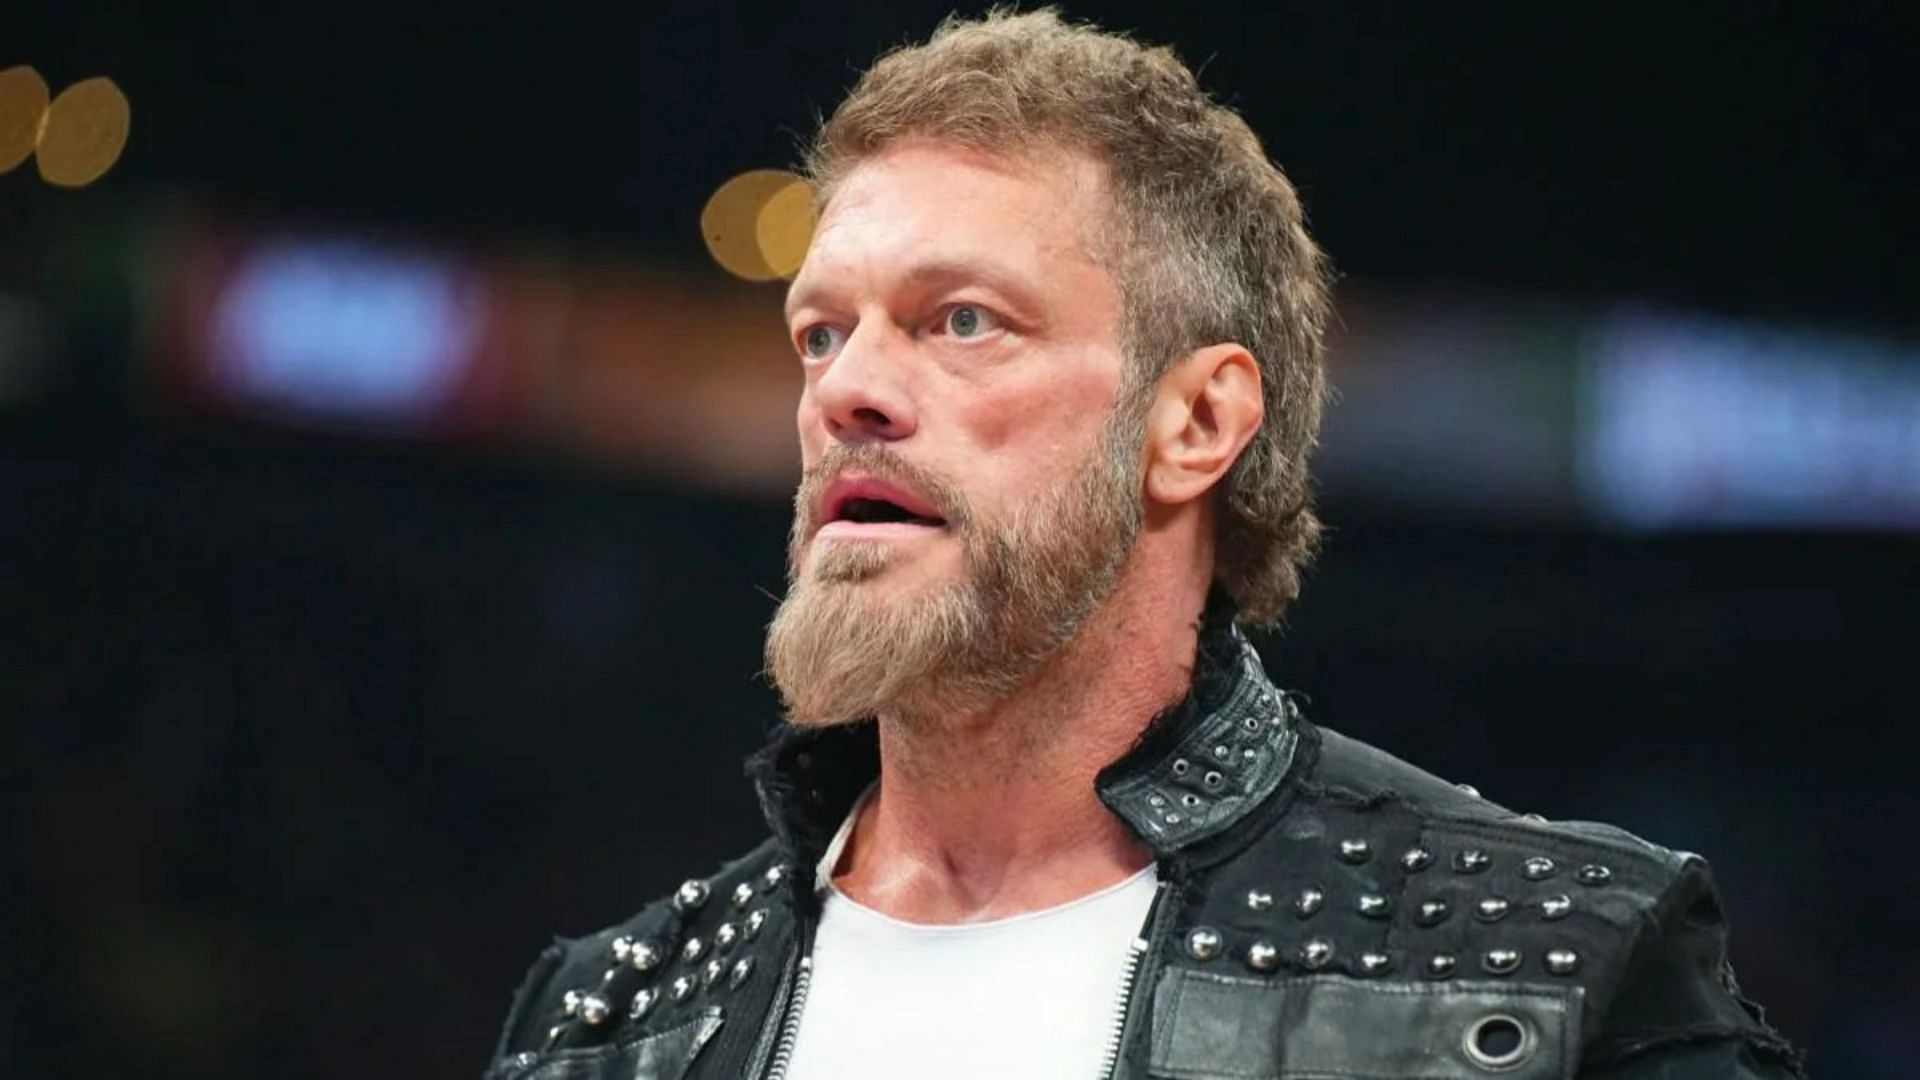 WWE Hall of Famer Edge (Adam Copeland) recently joined AEW